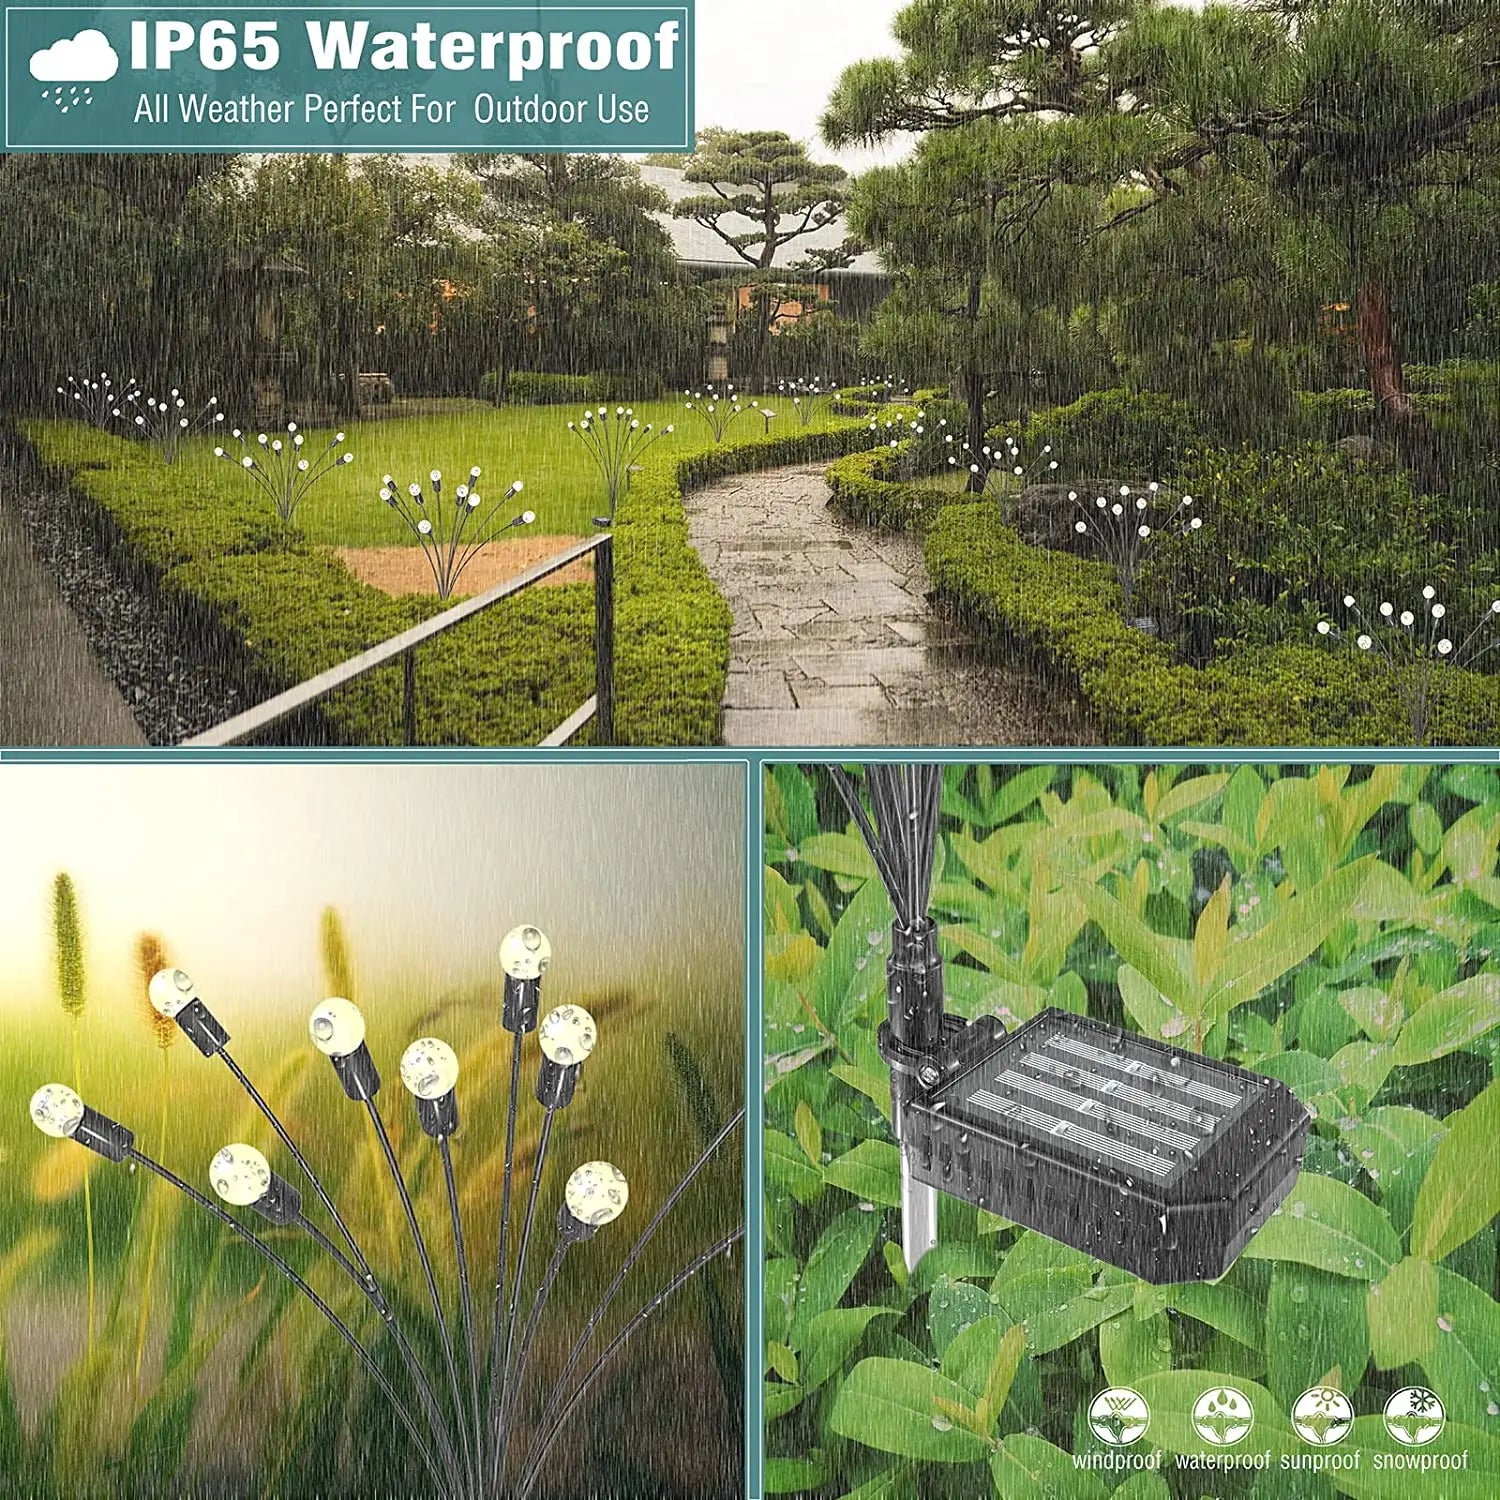 10/8/6LED Solar Firefly Light, Waterproof design suitable for outdoor use in any weather condition.